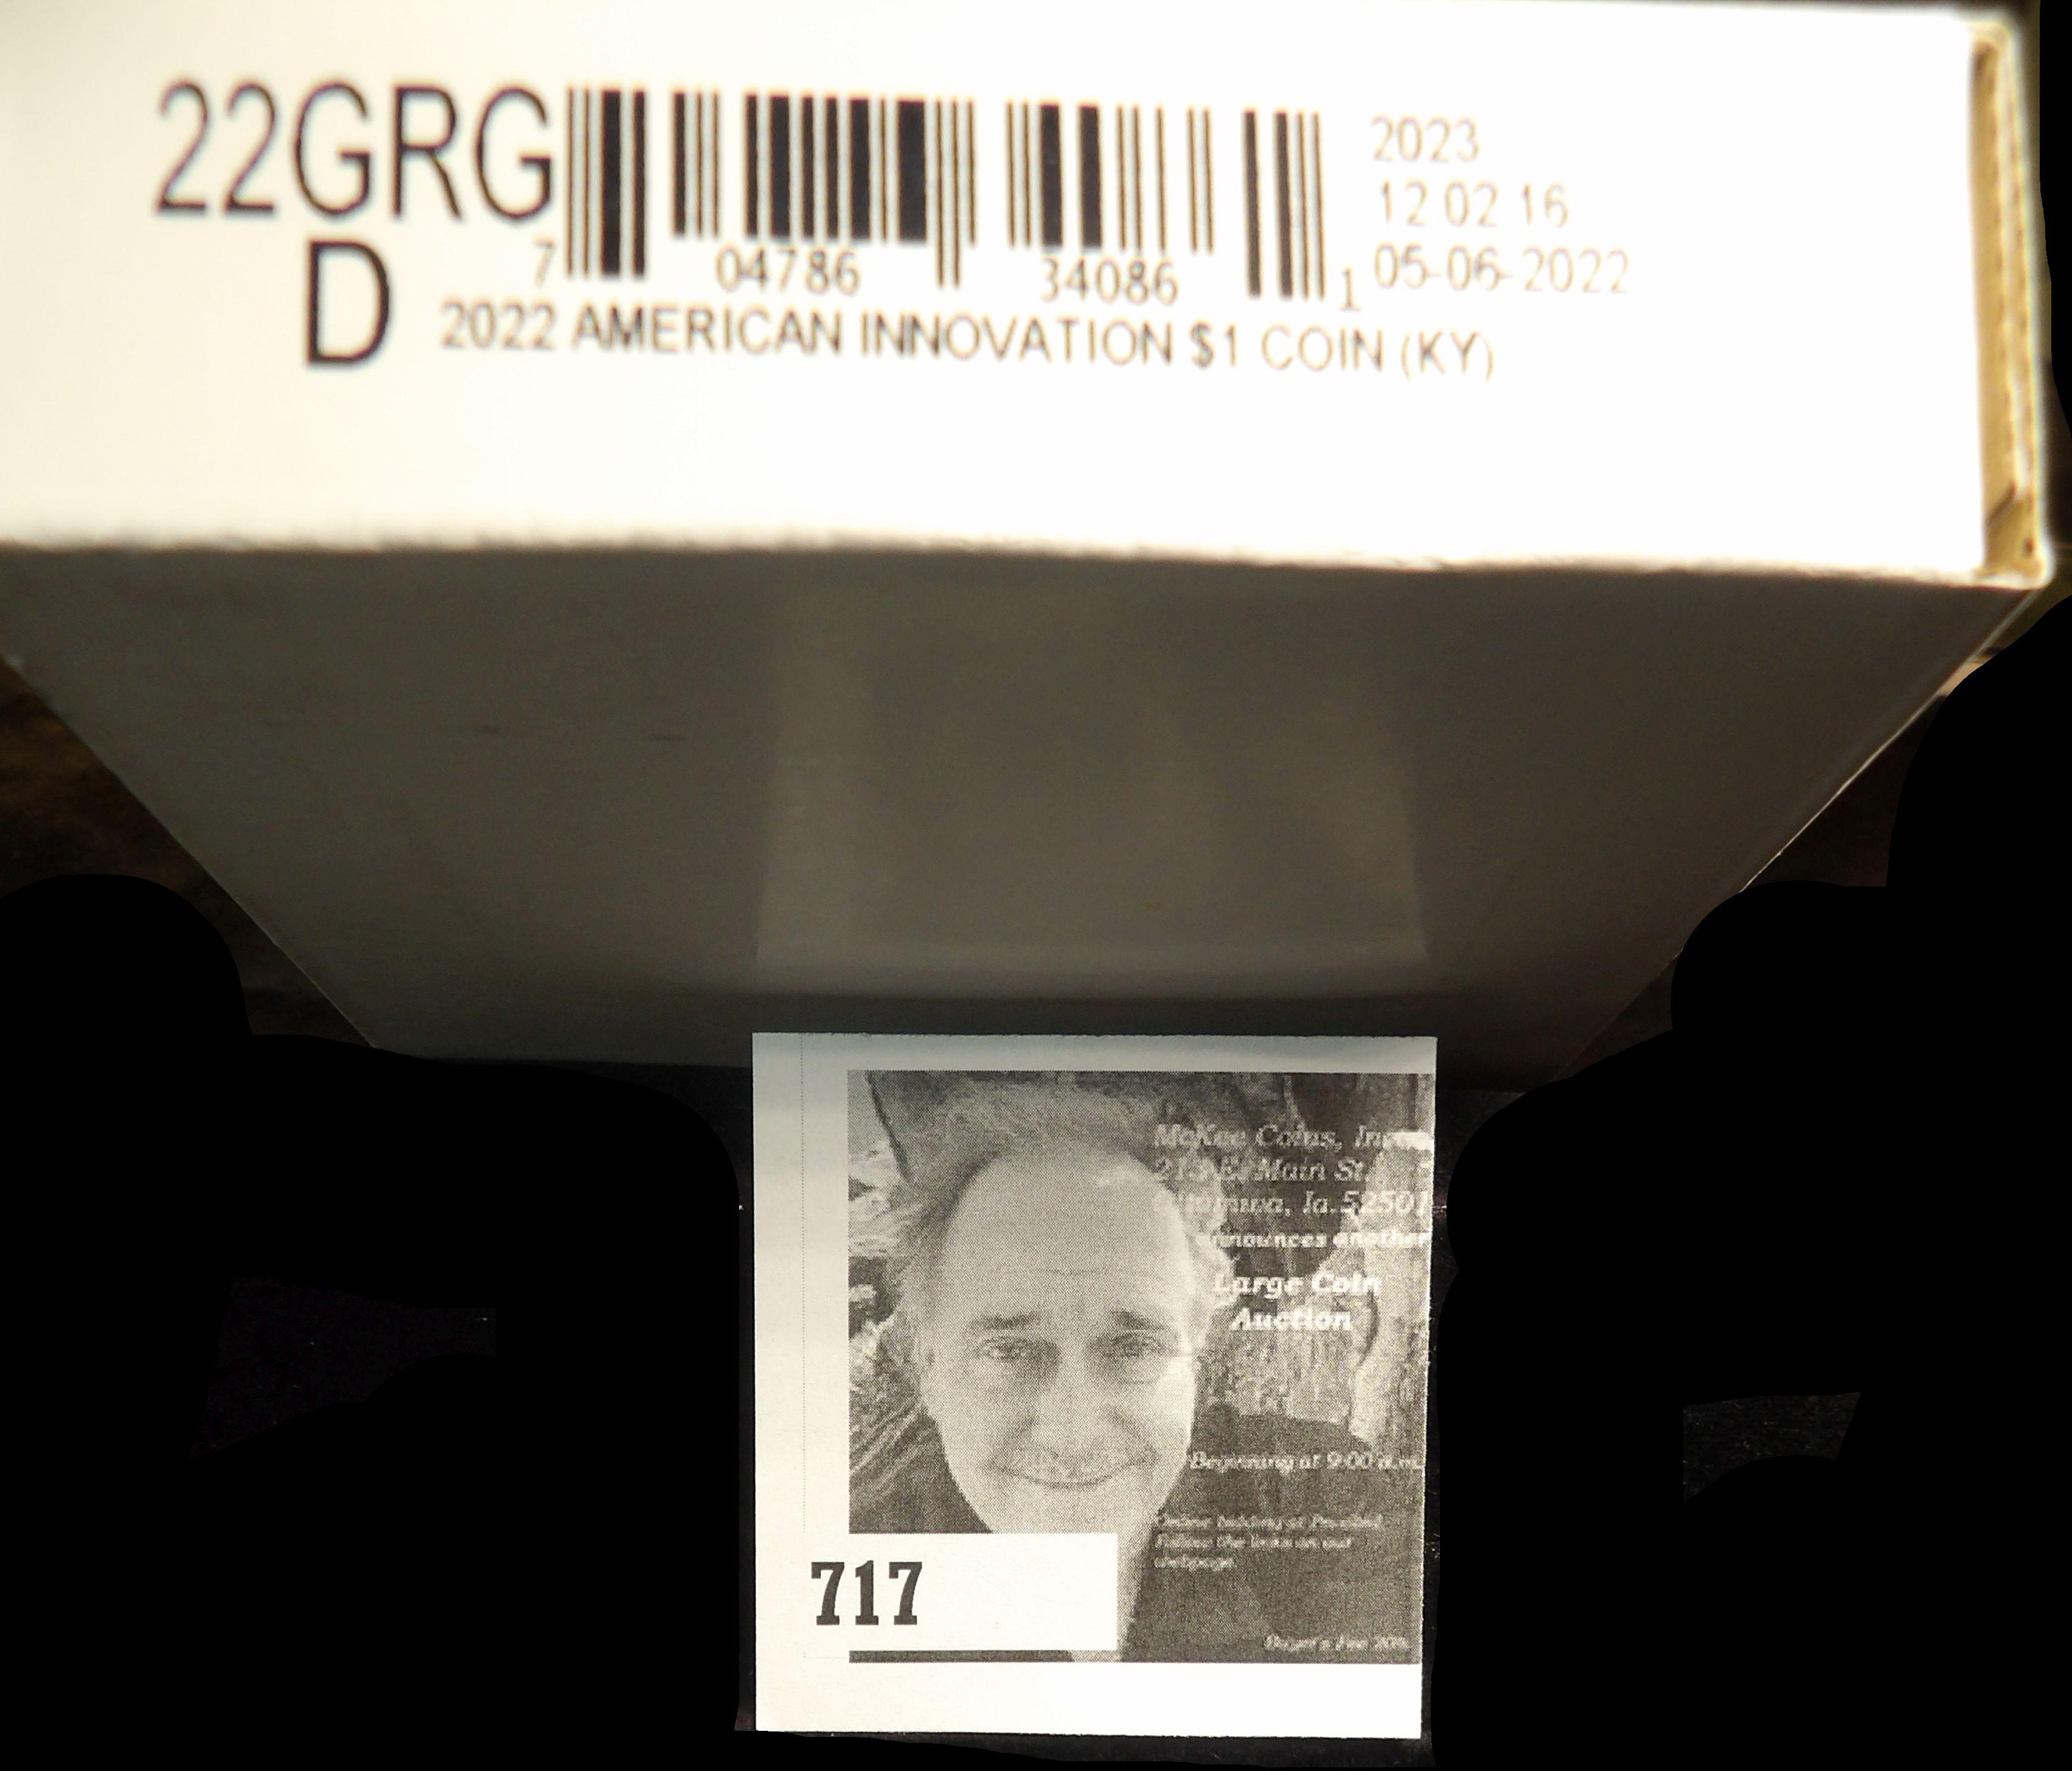 2022 D American Innovation $1 Kentucky Coin Roll in original unopened box from the U.S. Mint, (25 co